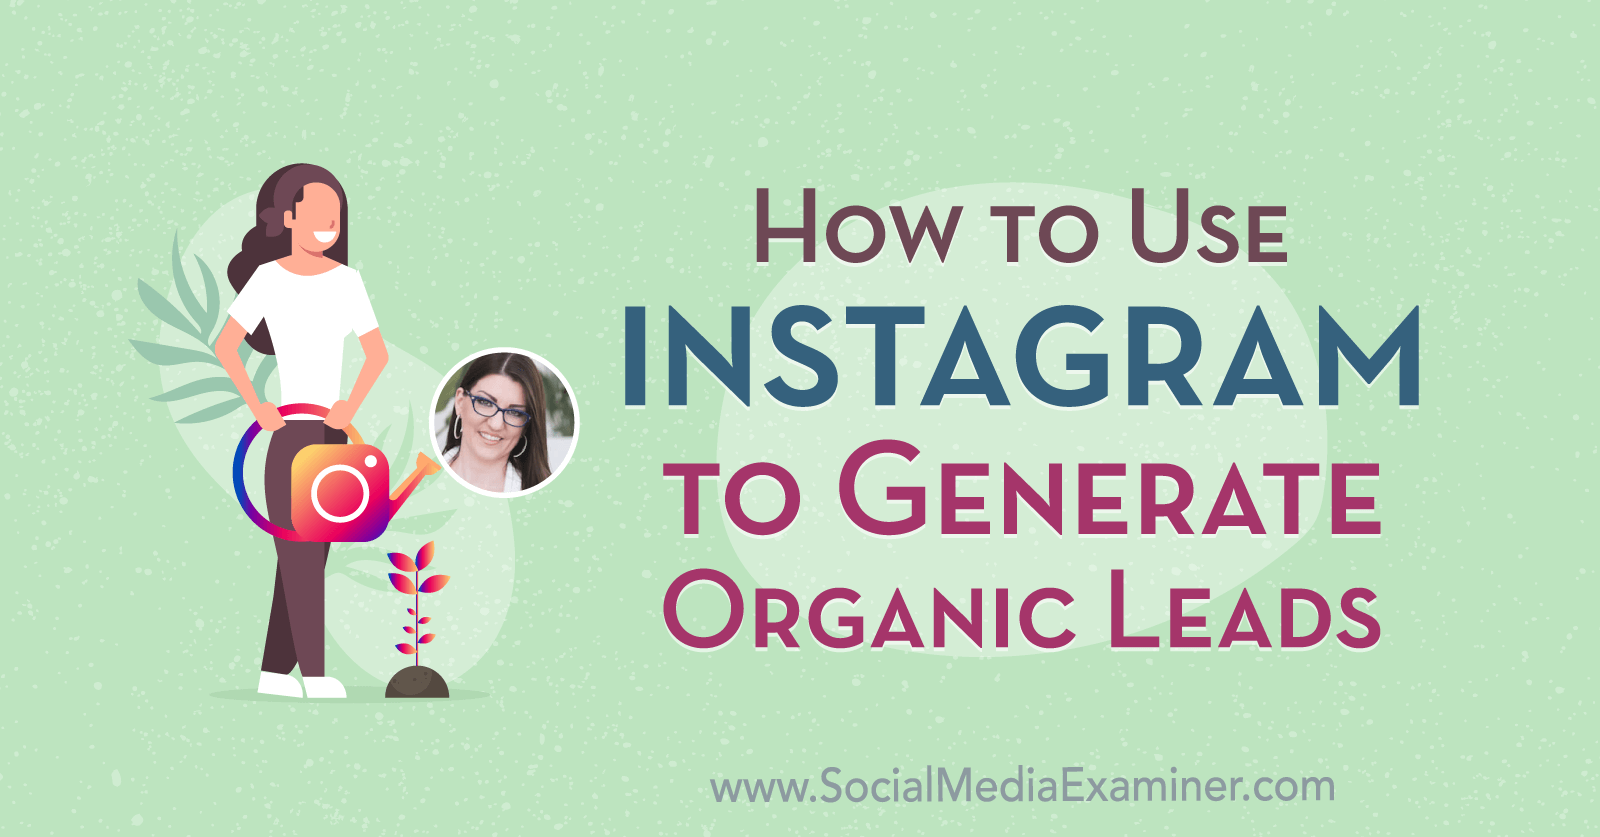 How to Use Instagram to Generate Organic Leads featuring insights from Jenn Herman on the Social Media Marketing Podcast.